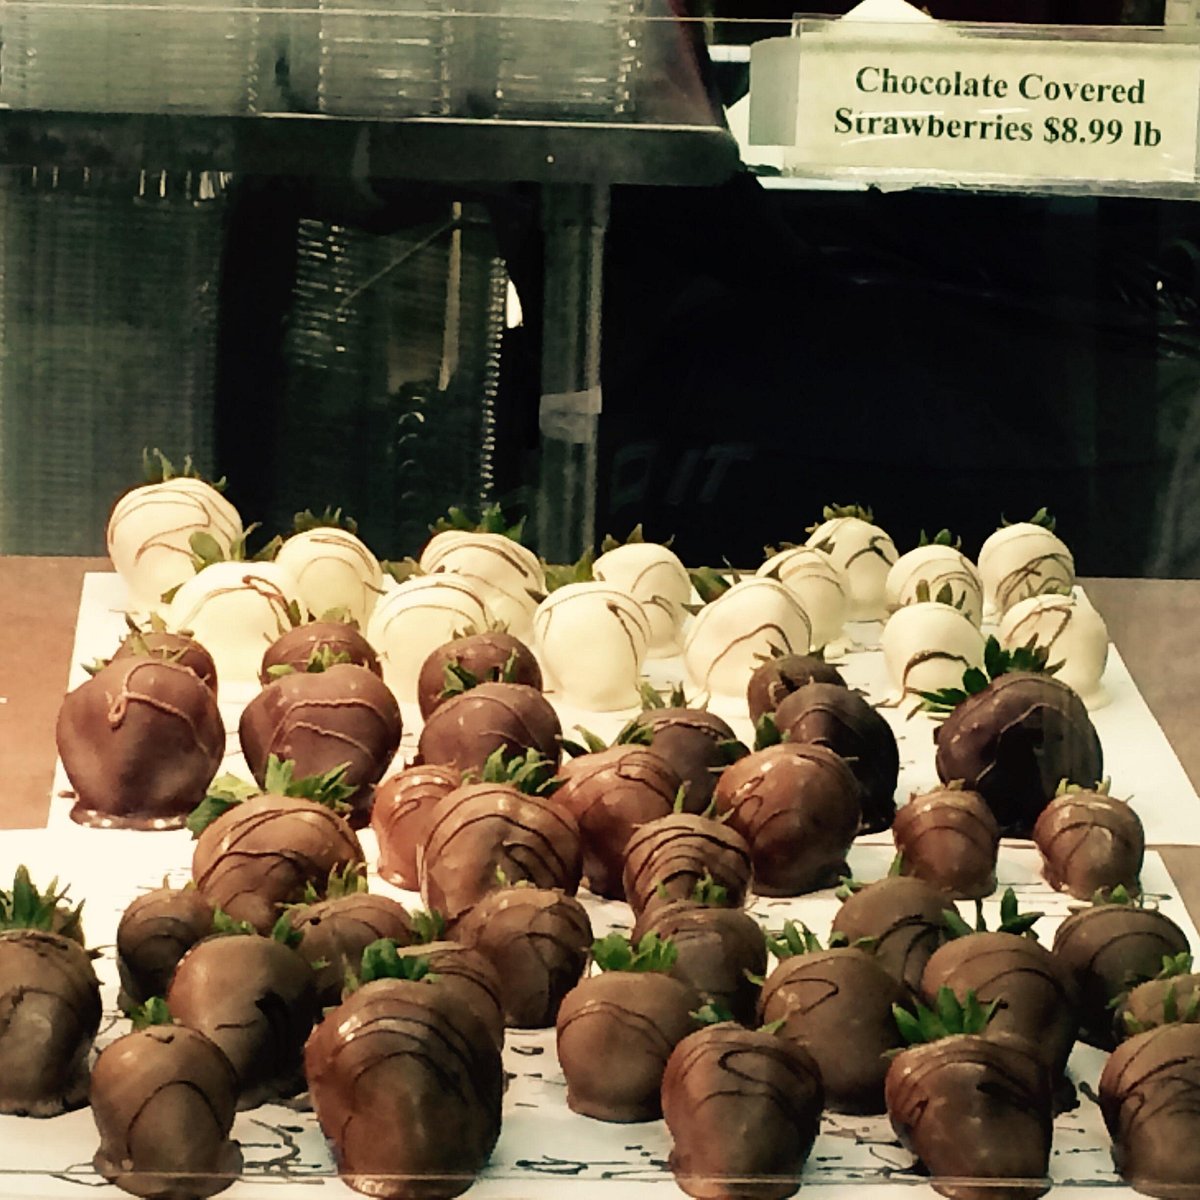 Chocolate Covered Strawberries ?w=1200&h=1200&s=1